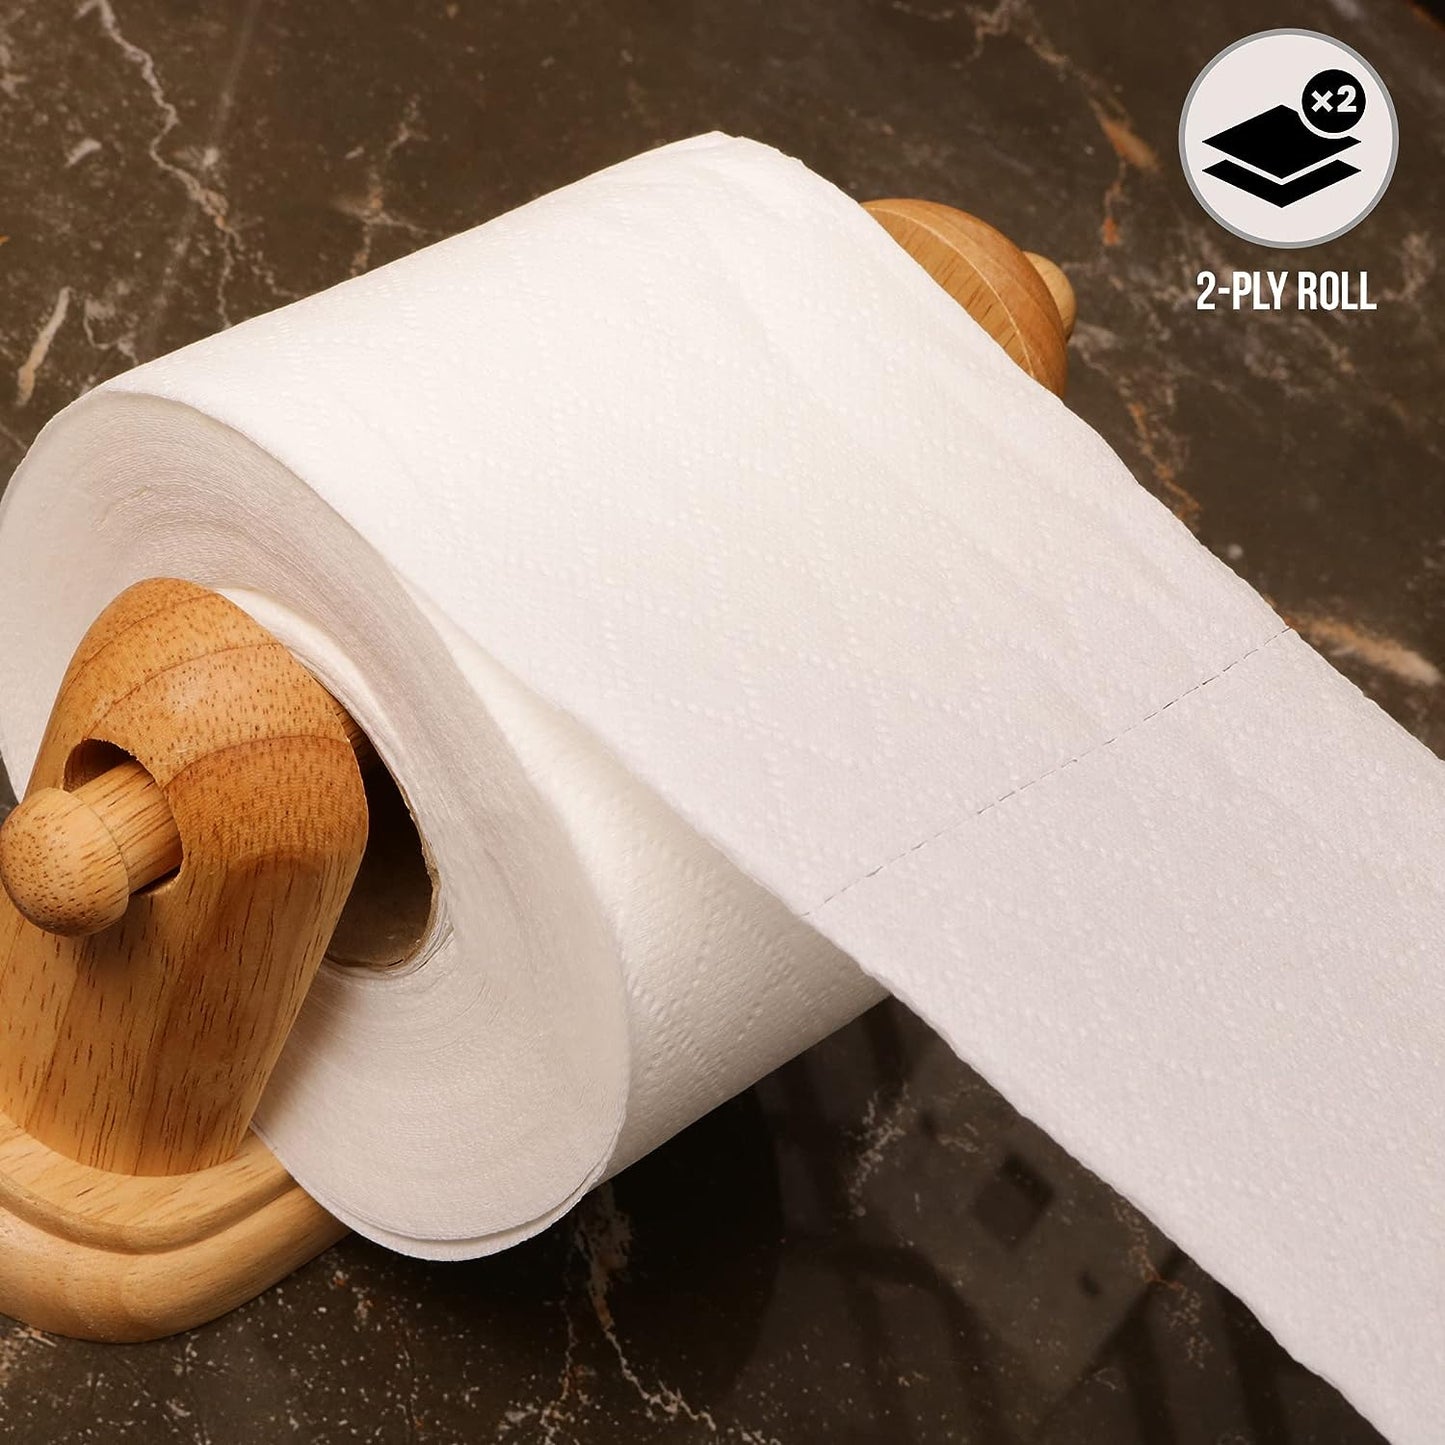 Janit-X Toilet Roll 2ply 320 Sheets XL Pack of 40's {10 x 4 Pack}